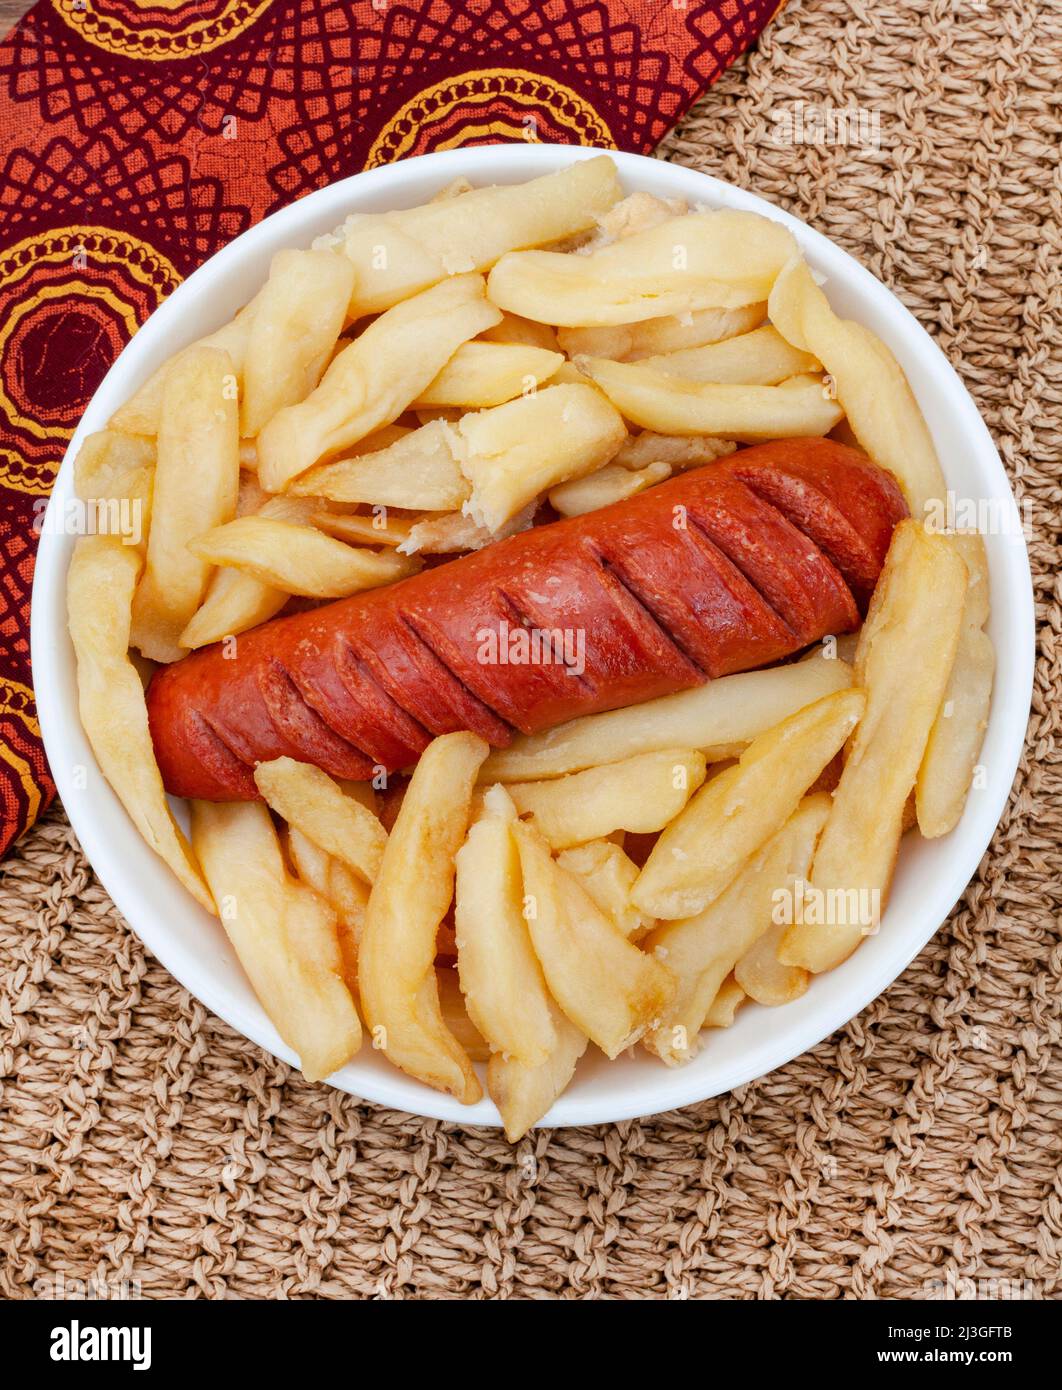 traditional South African take away or street food, Russian sausage and ...